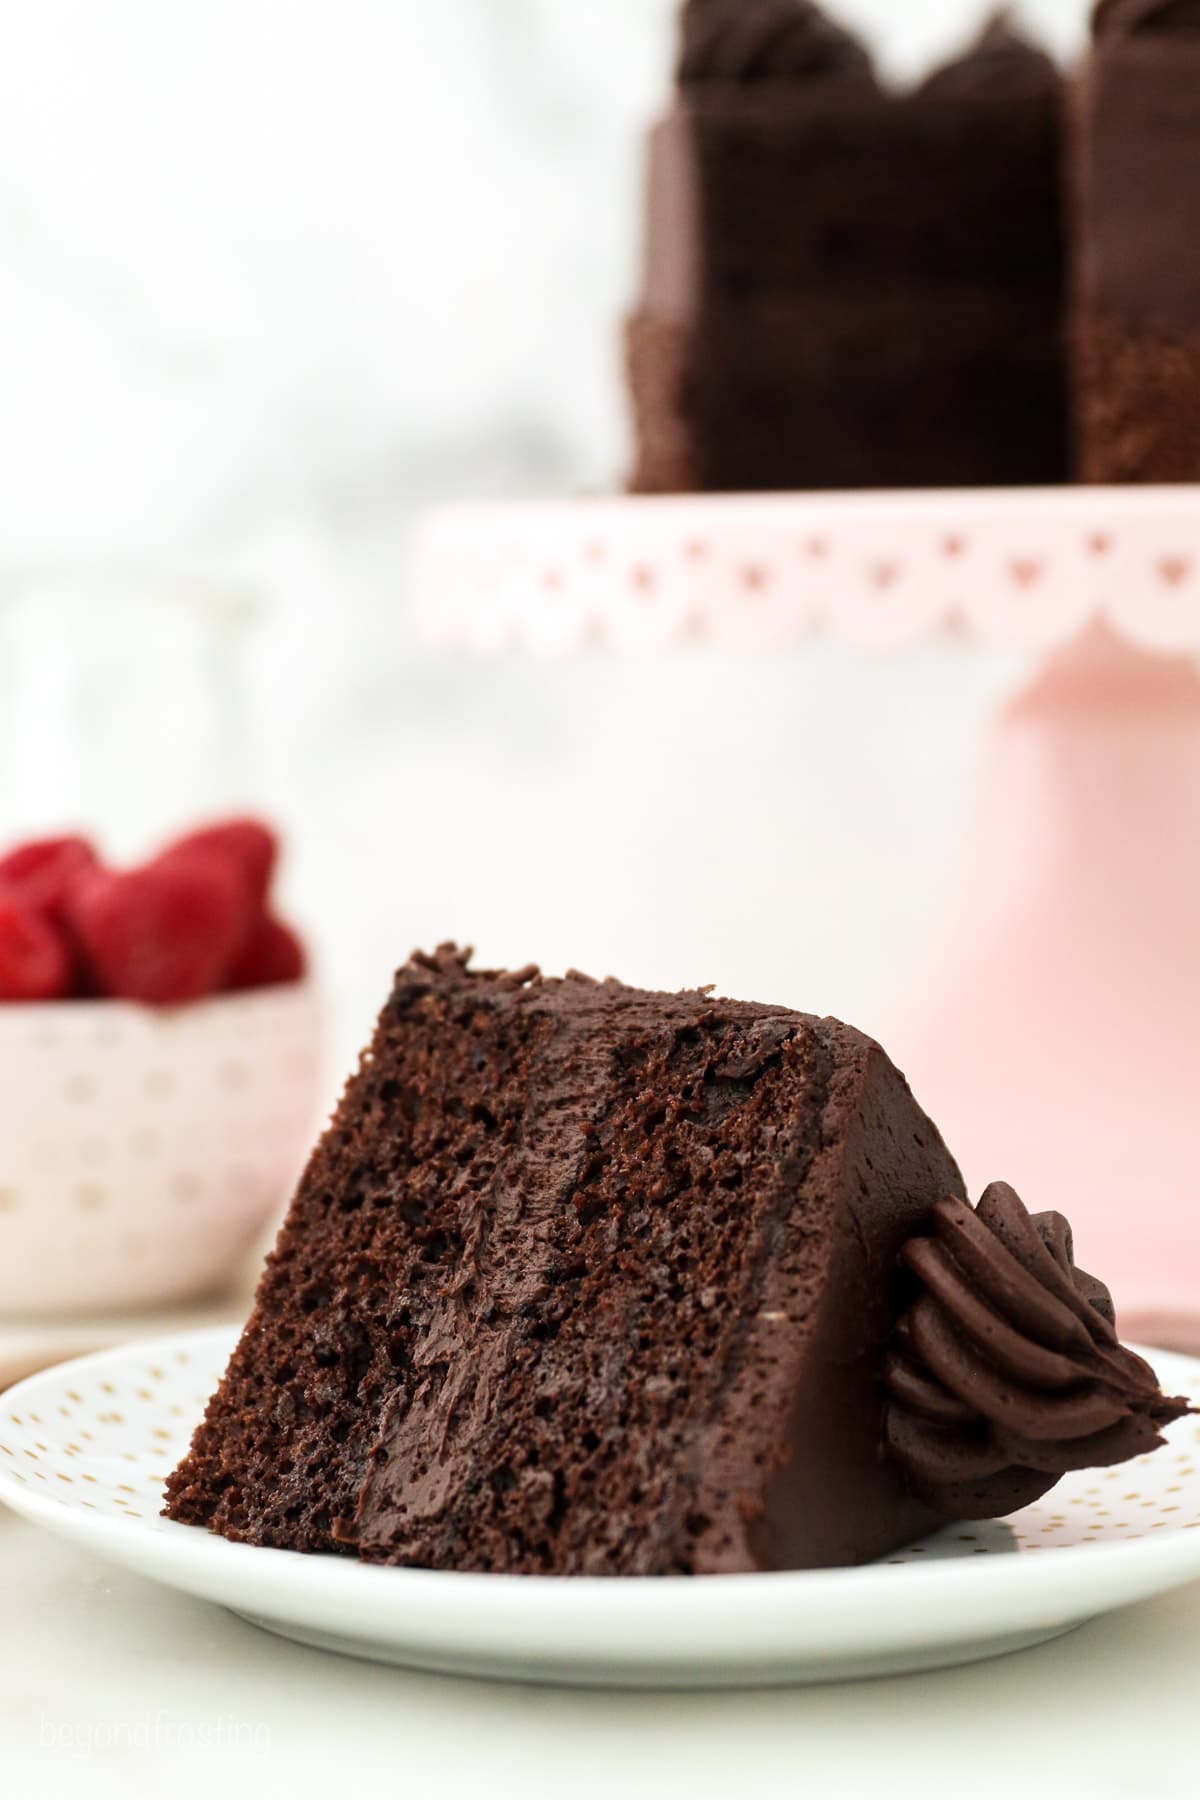 A slice of small chocolate cake topped with a swirl of chocolate buttercream laying on its side on a white plate, with the rest of the cake on a pink cake stand in the background.